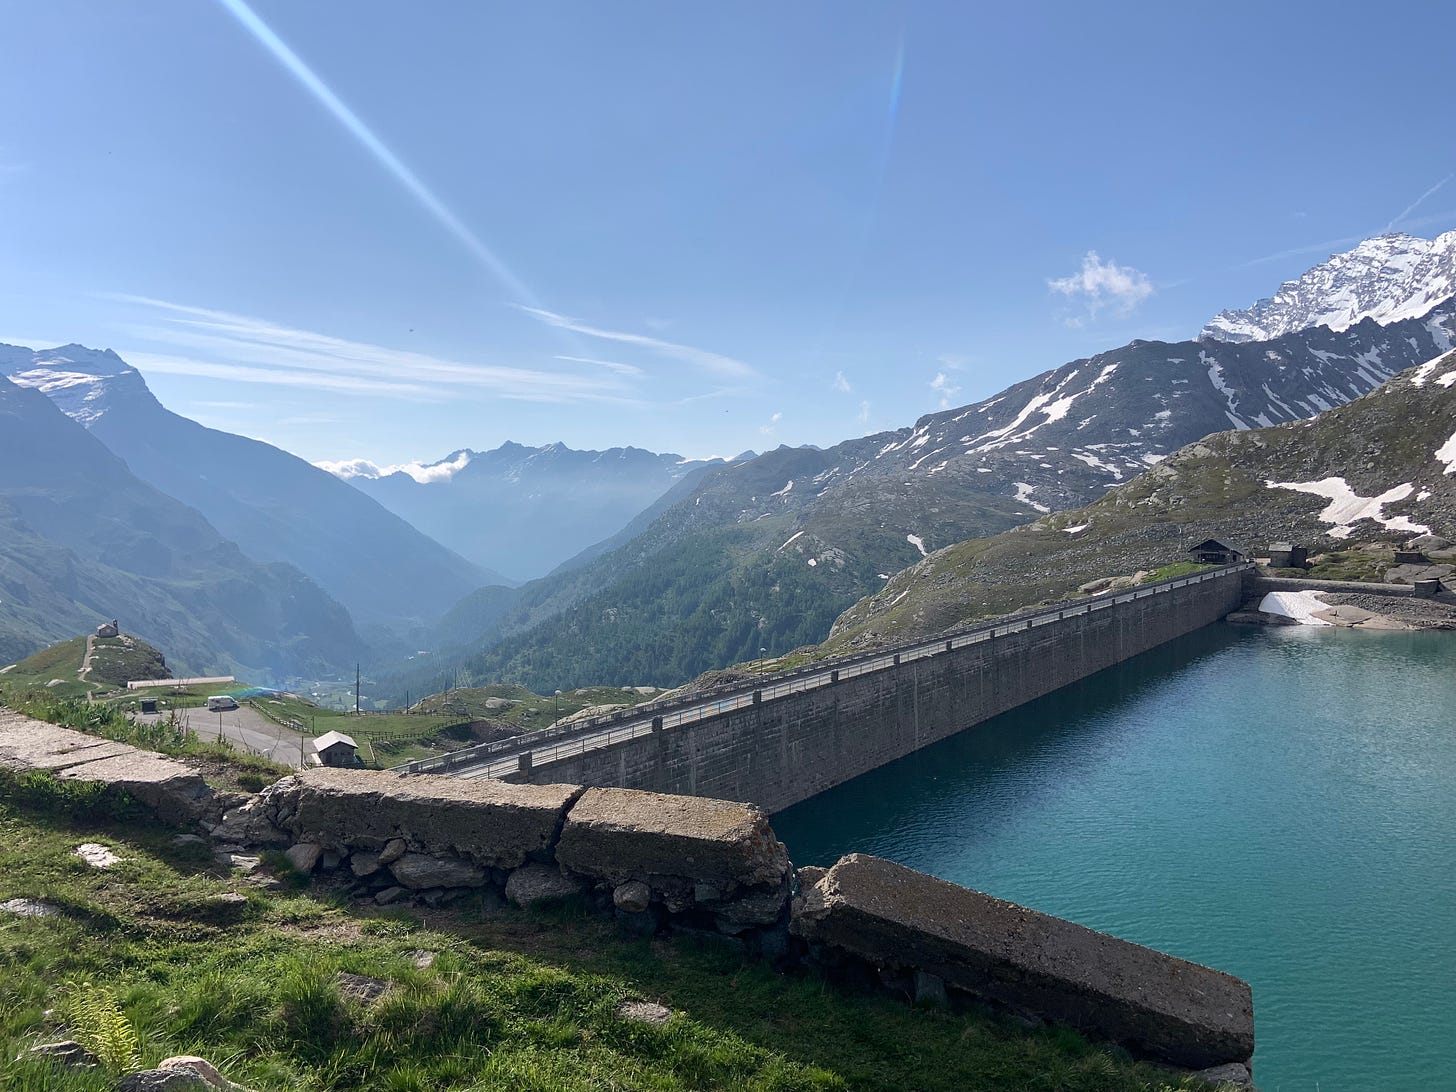 Gran Paradiso National Park, indescribable beauty of a place where the mountains are higher than 2000 meters above sea level and where you feel renewe